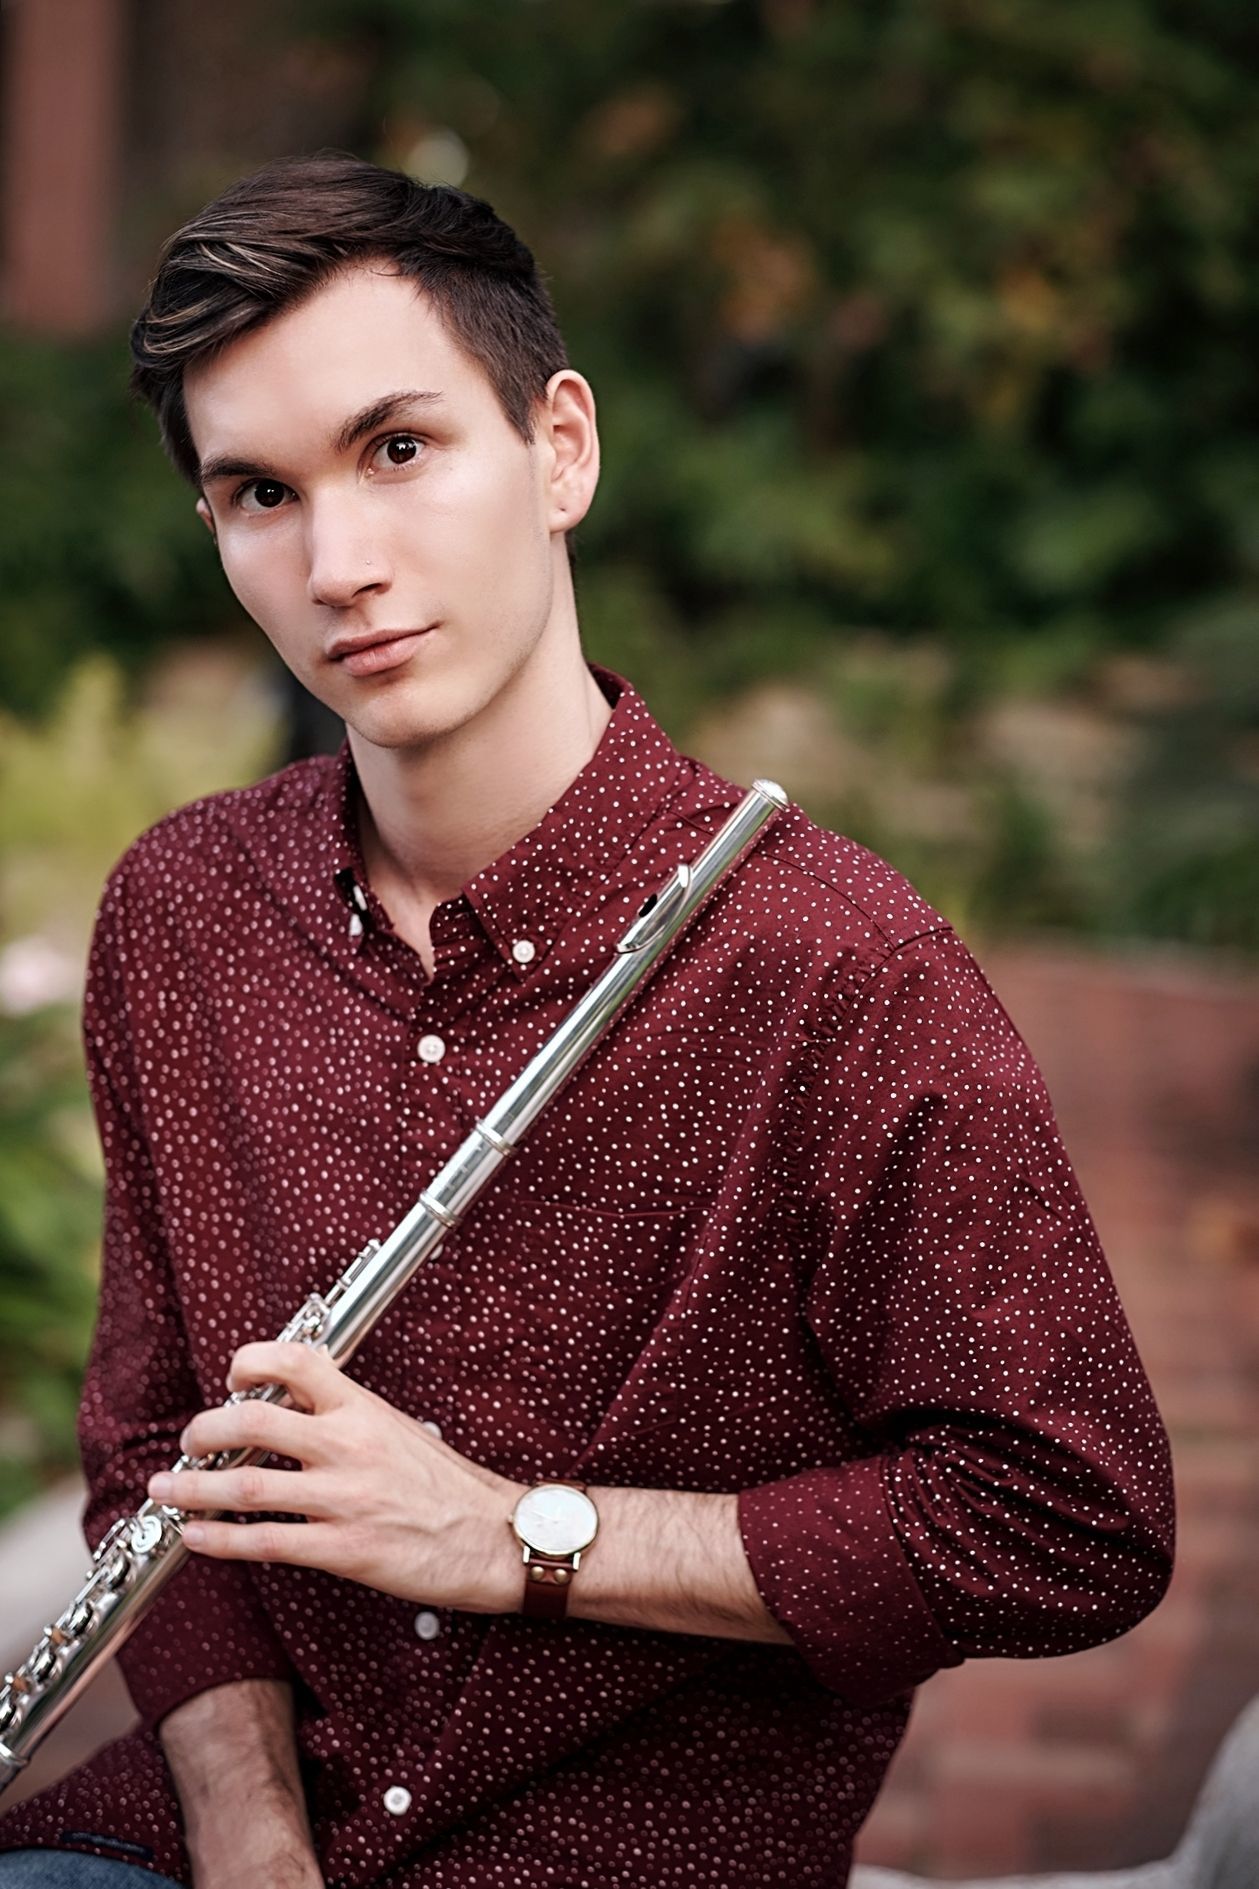 Bradenton native Graeme Sugden is excited to perform so close to home at the Sarasota Music Festival. (Courtesy photo)